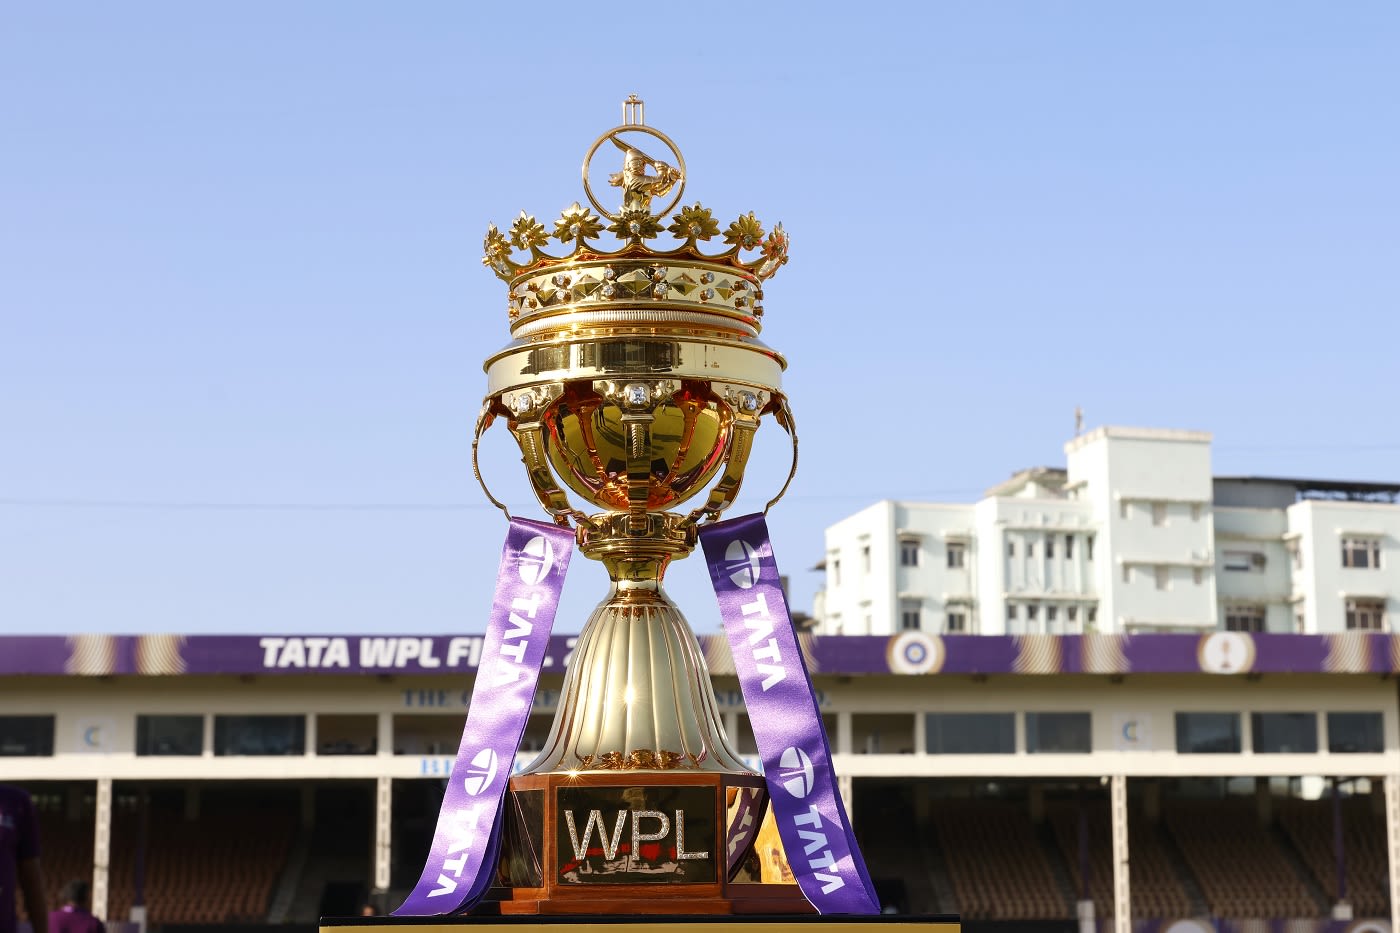 The WPL trophy on display